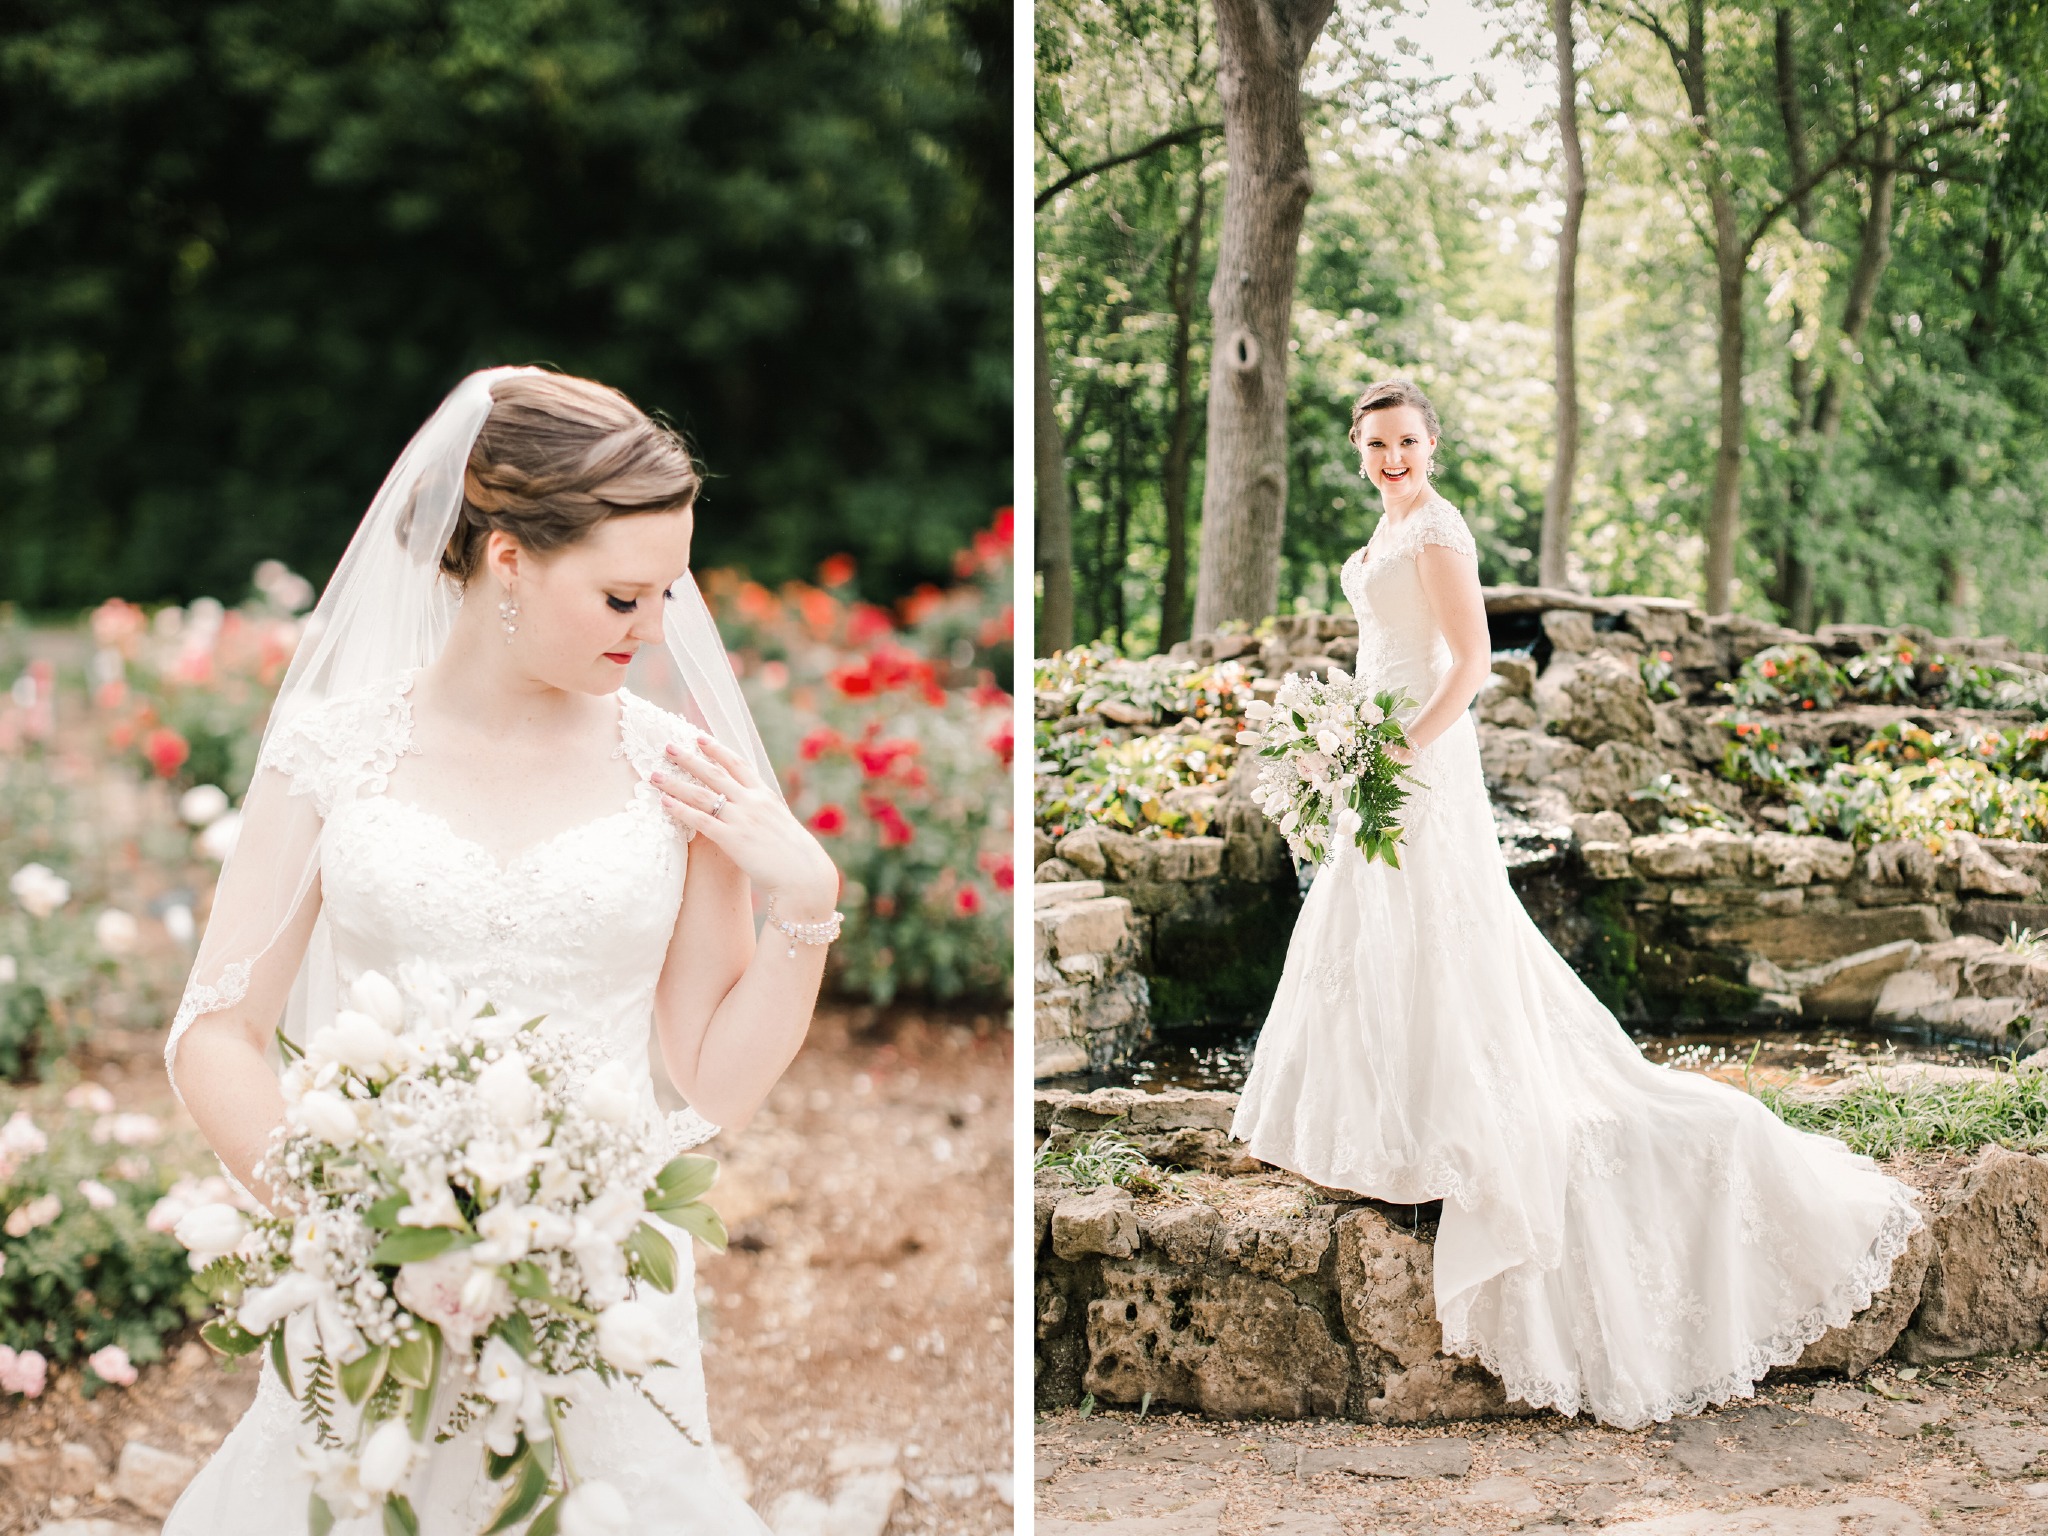 Bride in the park by Springfield MO Wedding Photographers Turner Creative